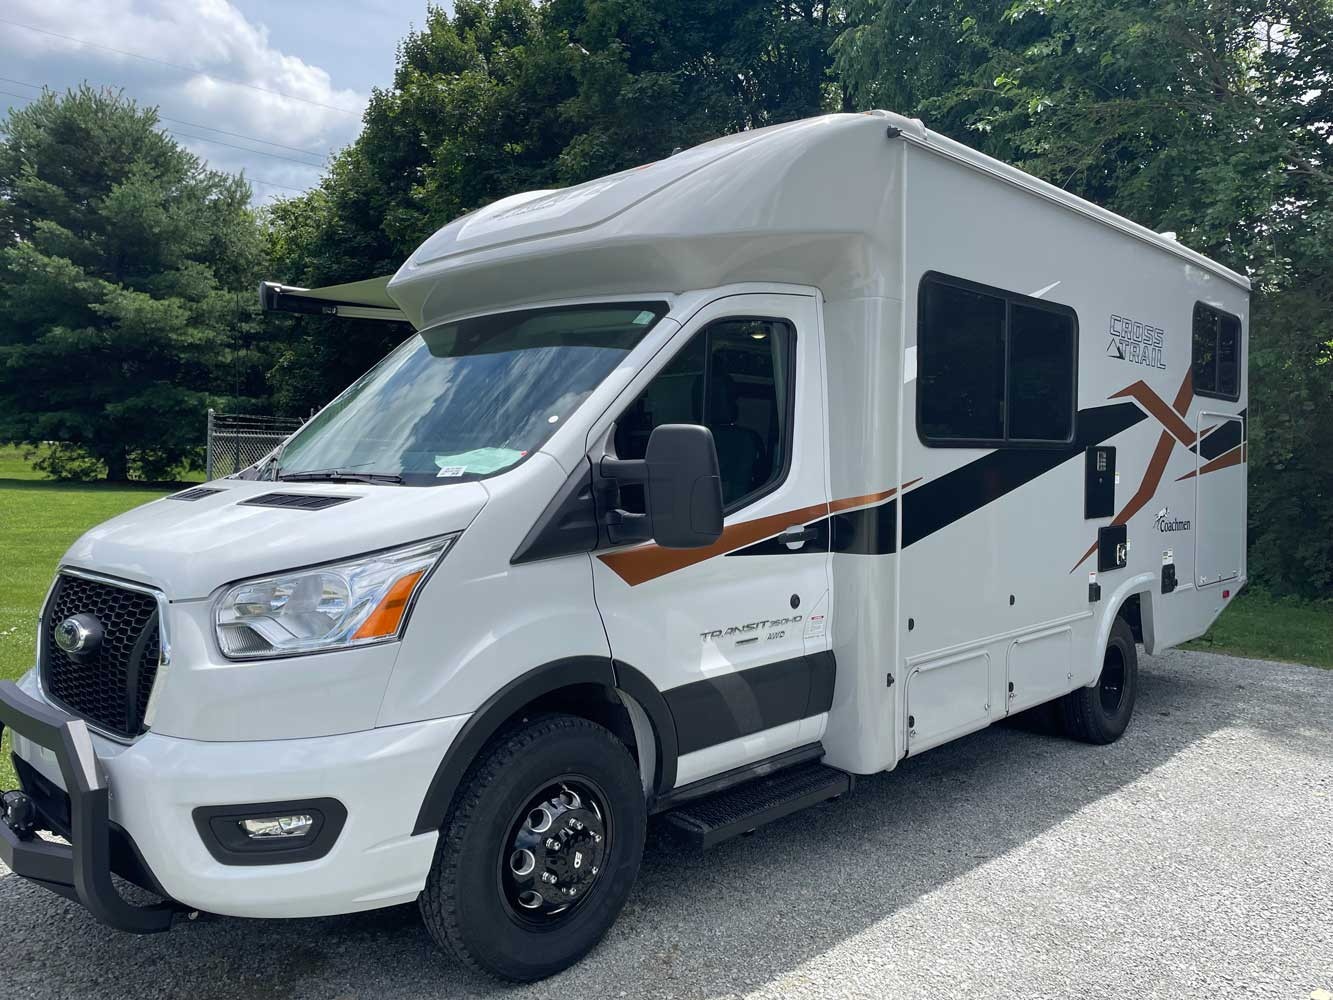 This 2023 Coachmen Cross Trail Offers Big RV Features in a Small